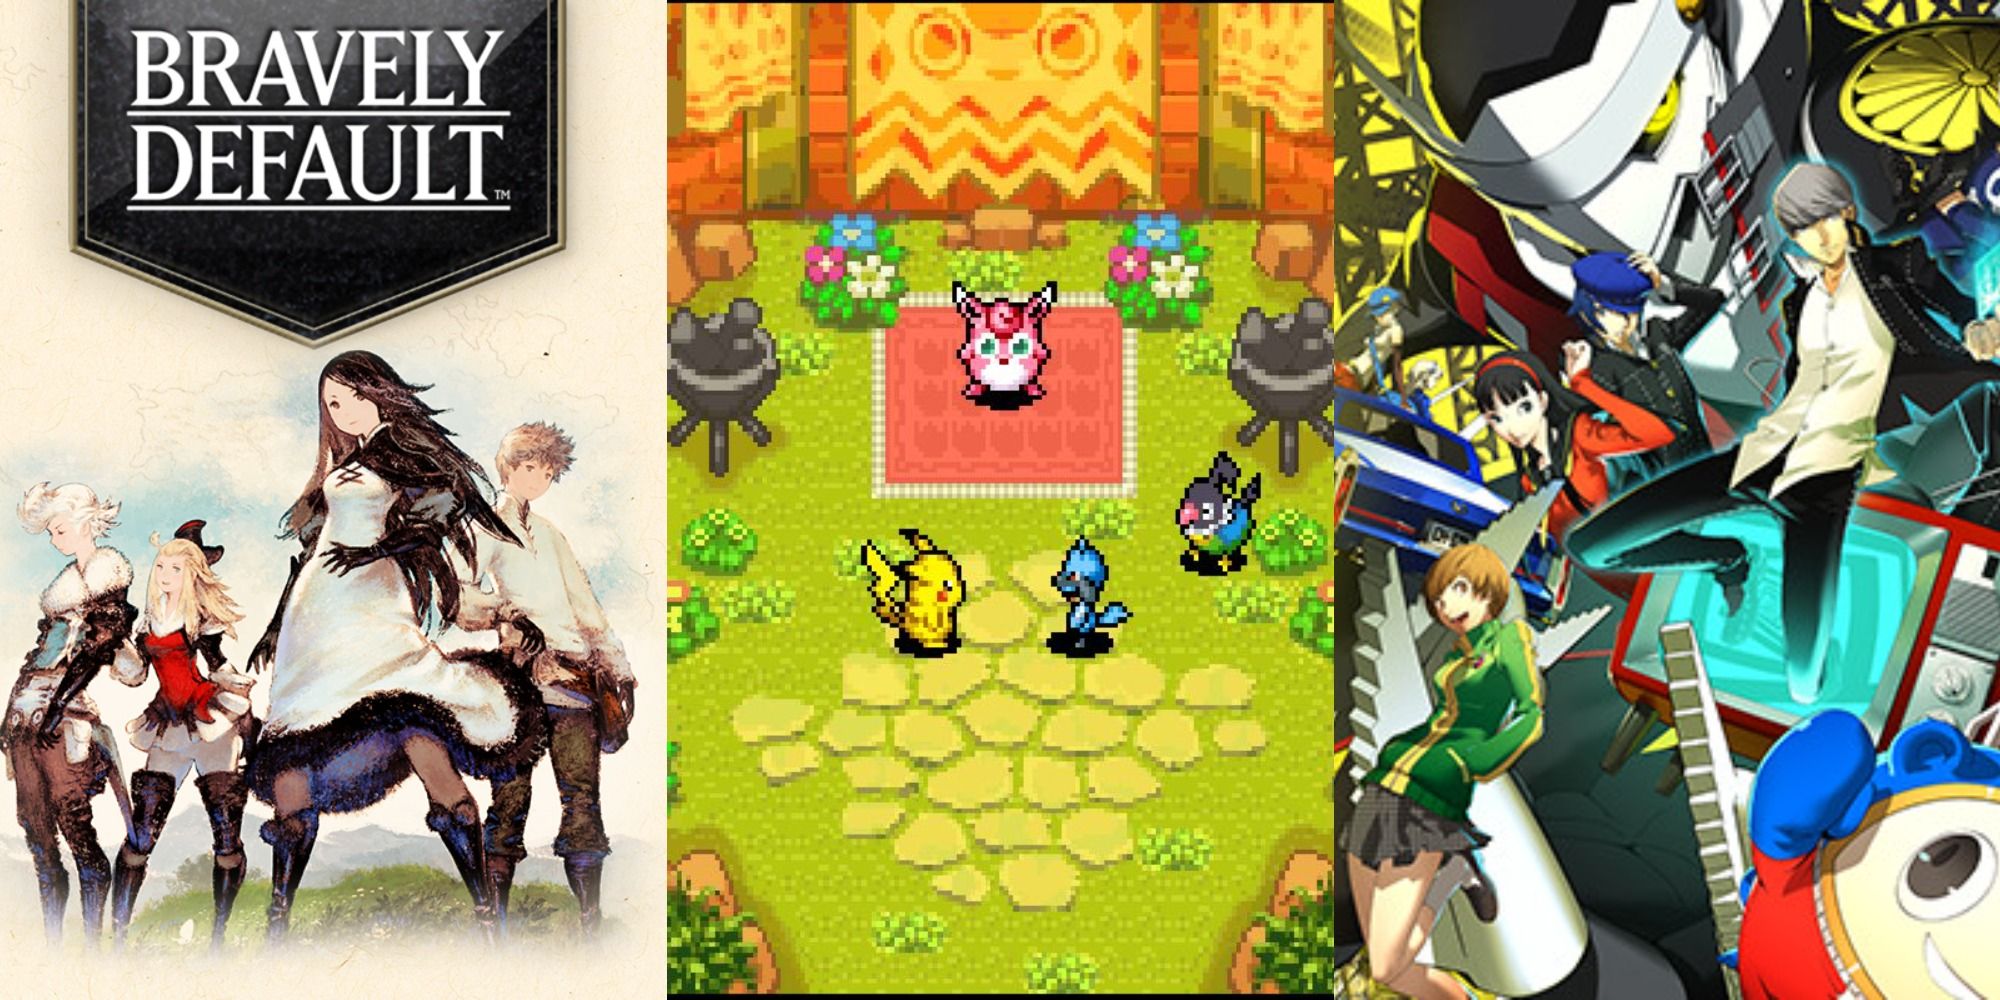 Best JRPG Games With Grind Bravely Default, Pokemon Mystery Dungeon Explorers of Sky, and Persona 4 Golden